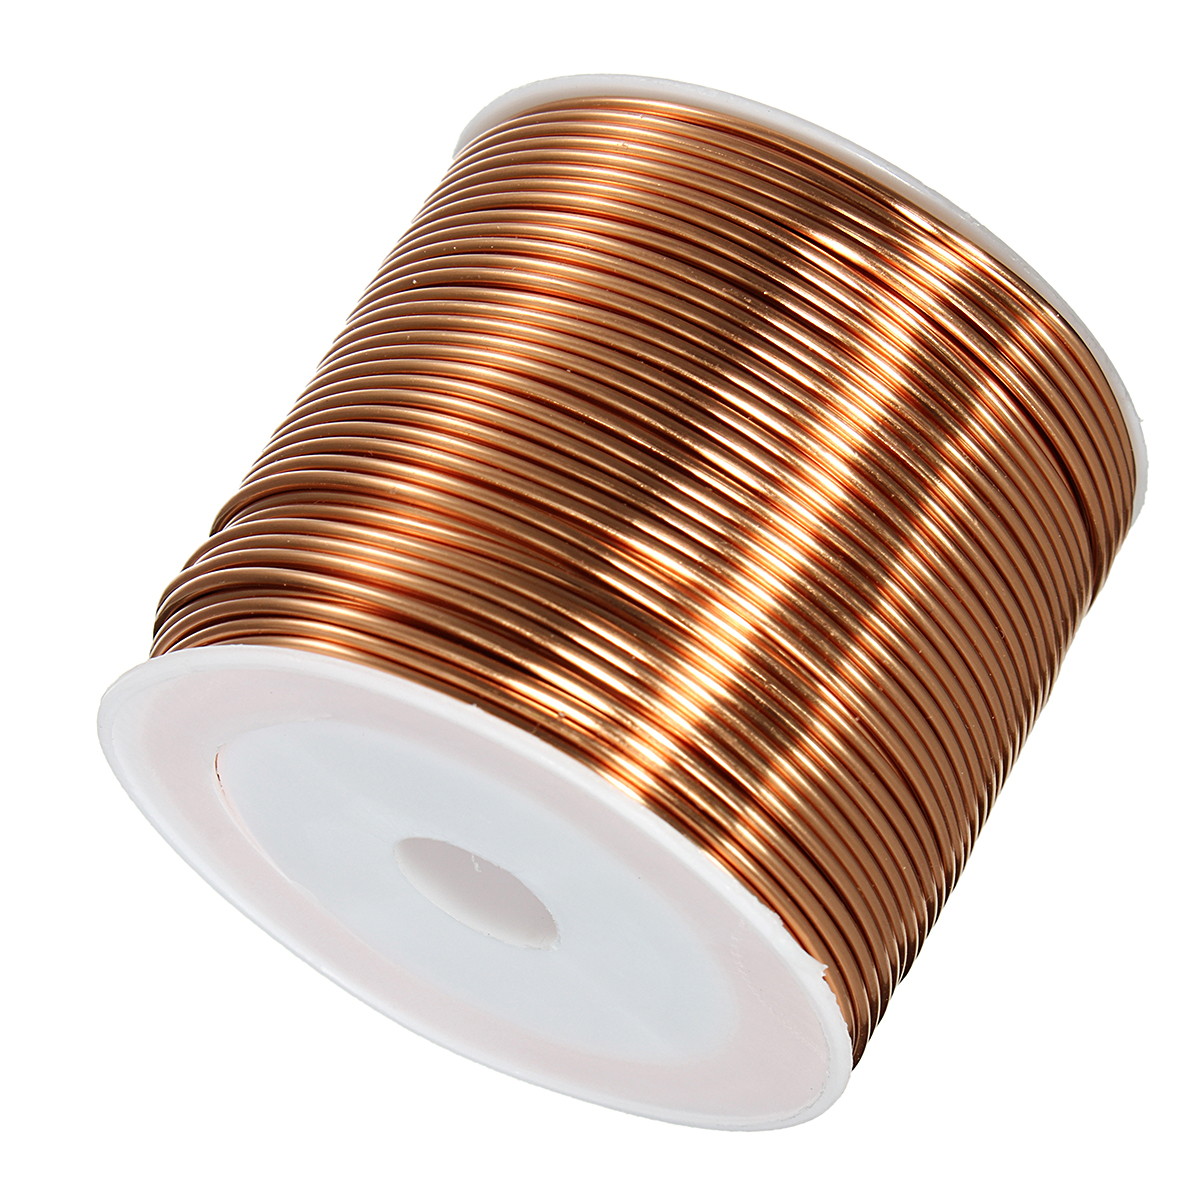 10mmx25m-Copper-Coil-Magnet-Wire-Welding-Cable-Enameled-Wire-Roll-1094161-1